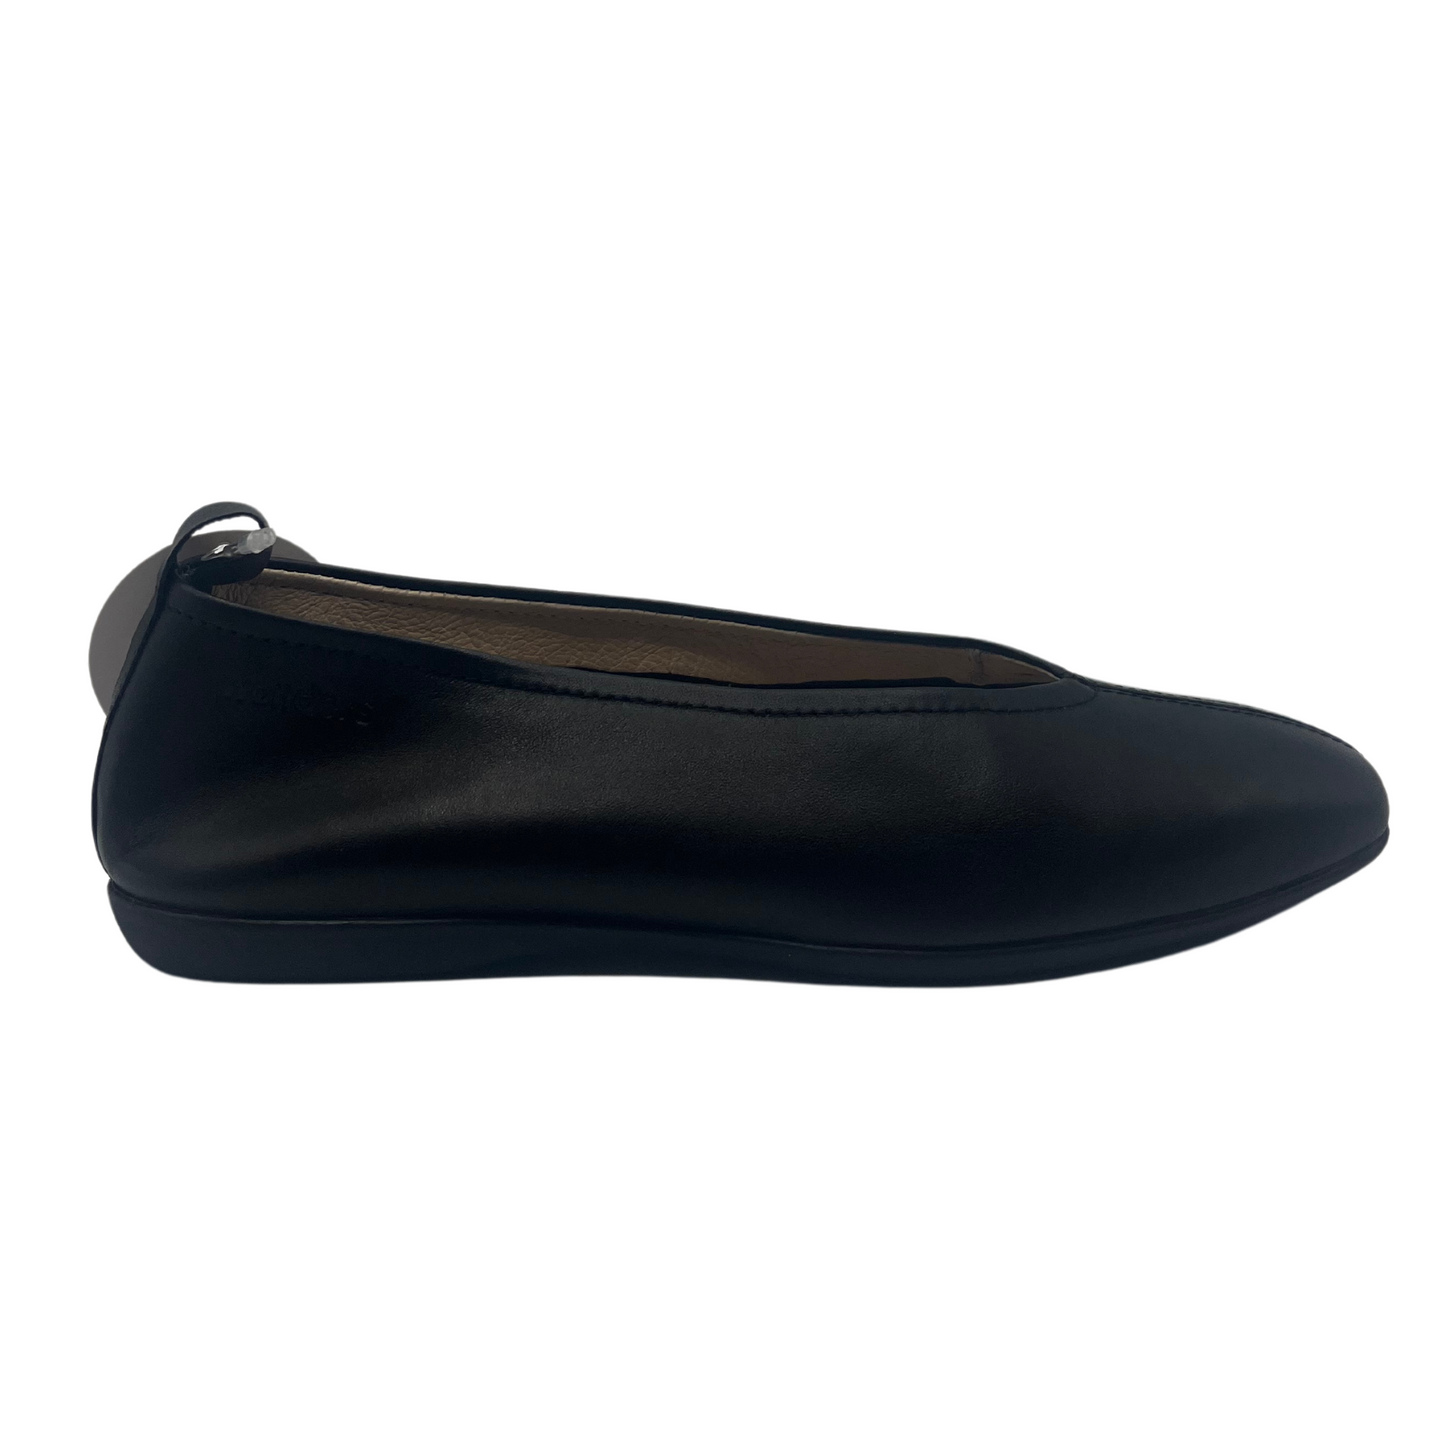 Right facing view of black leather ballet flat with rubber outsole